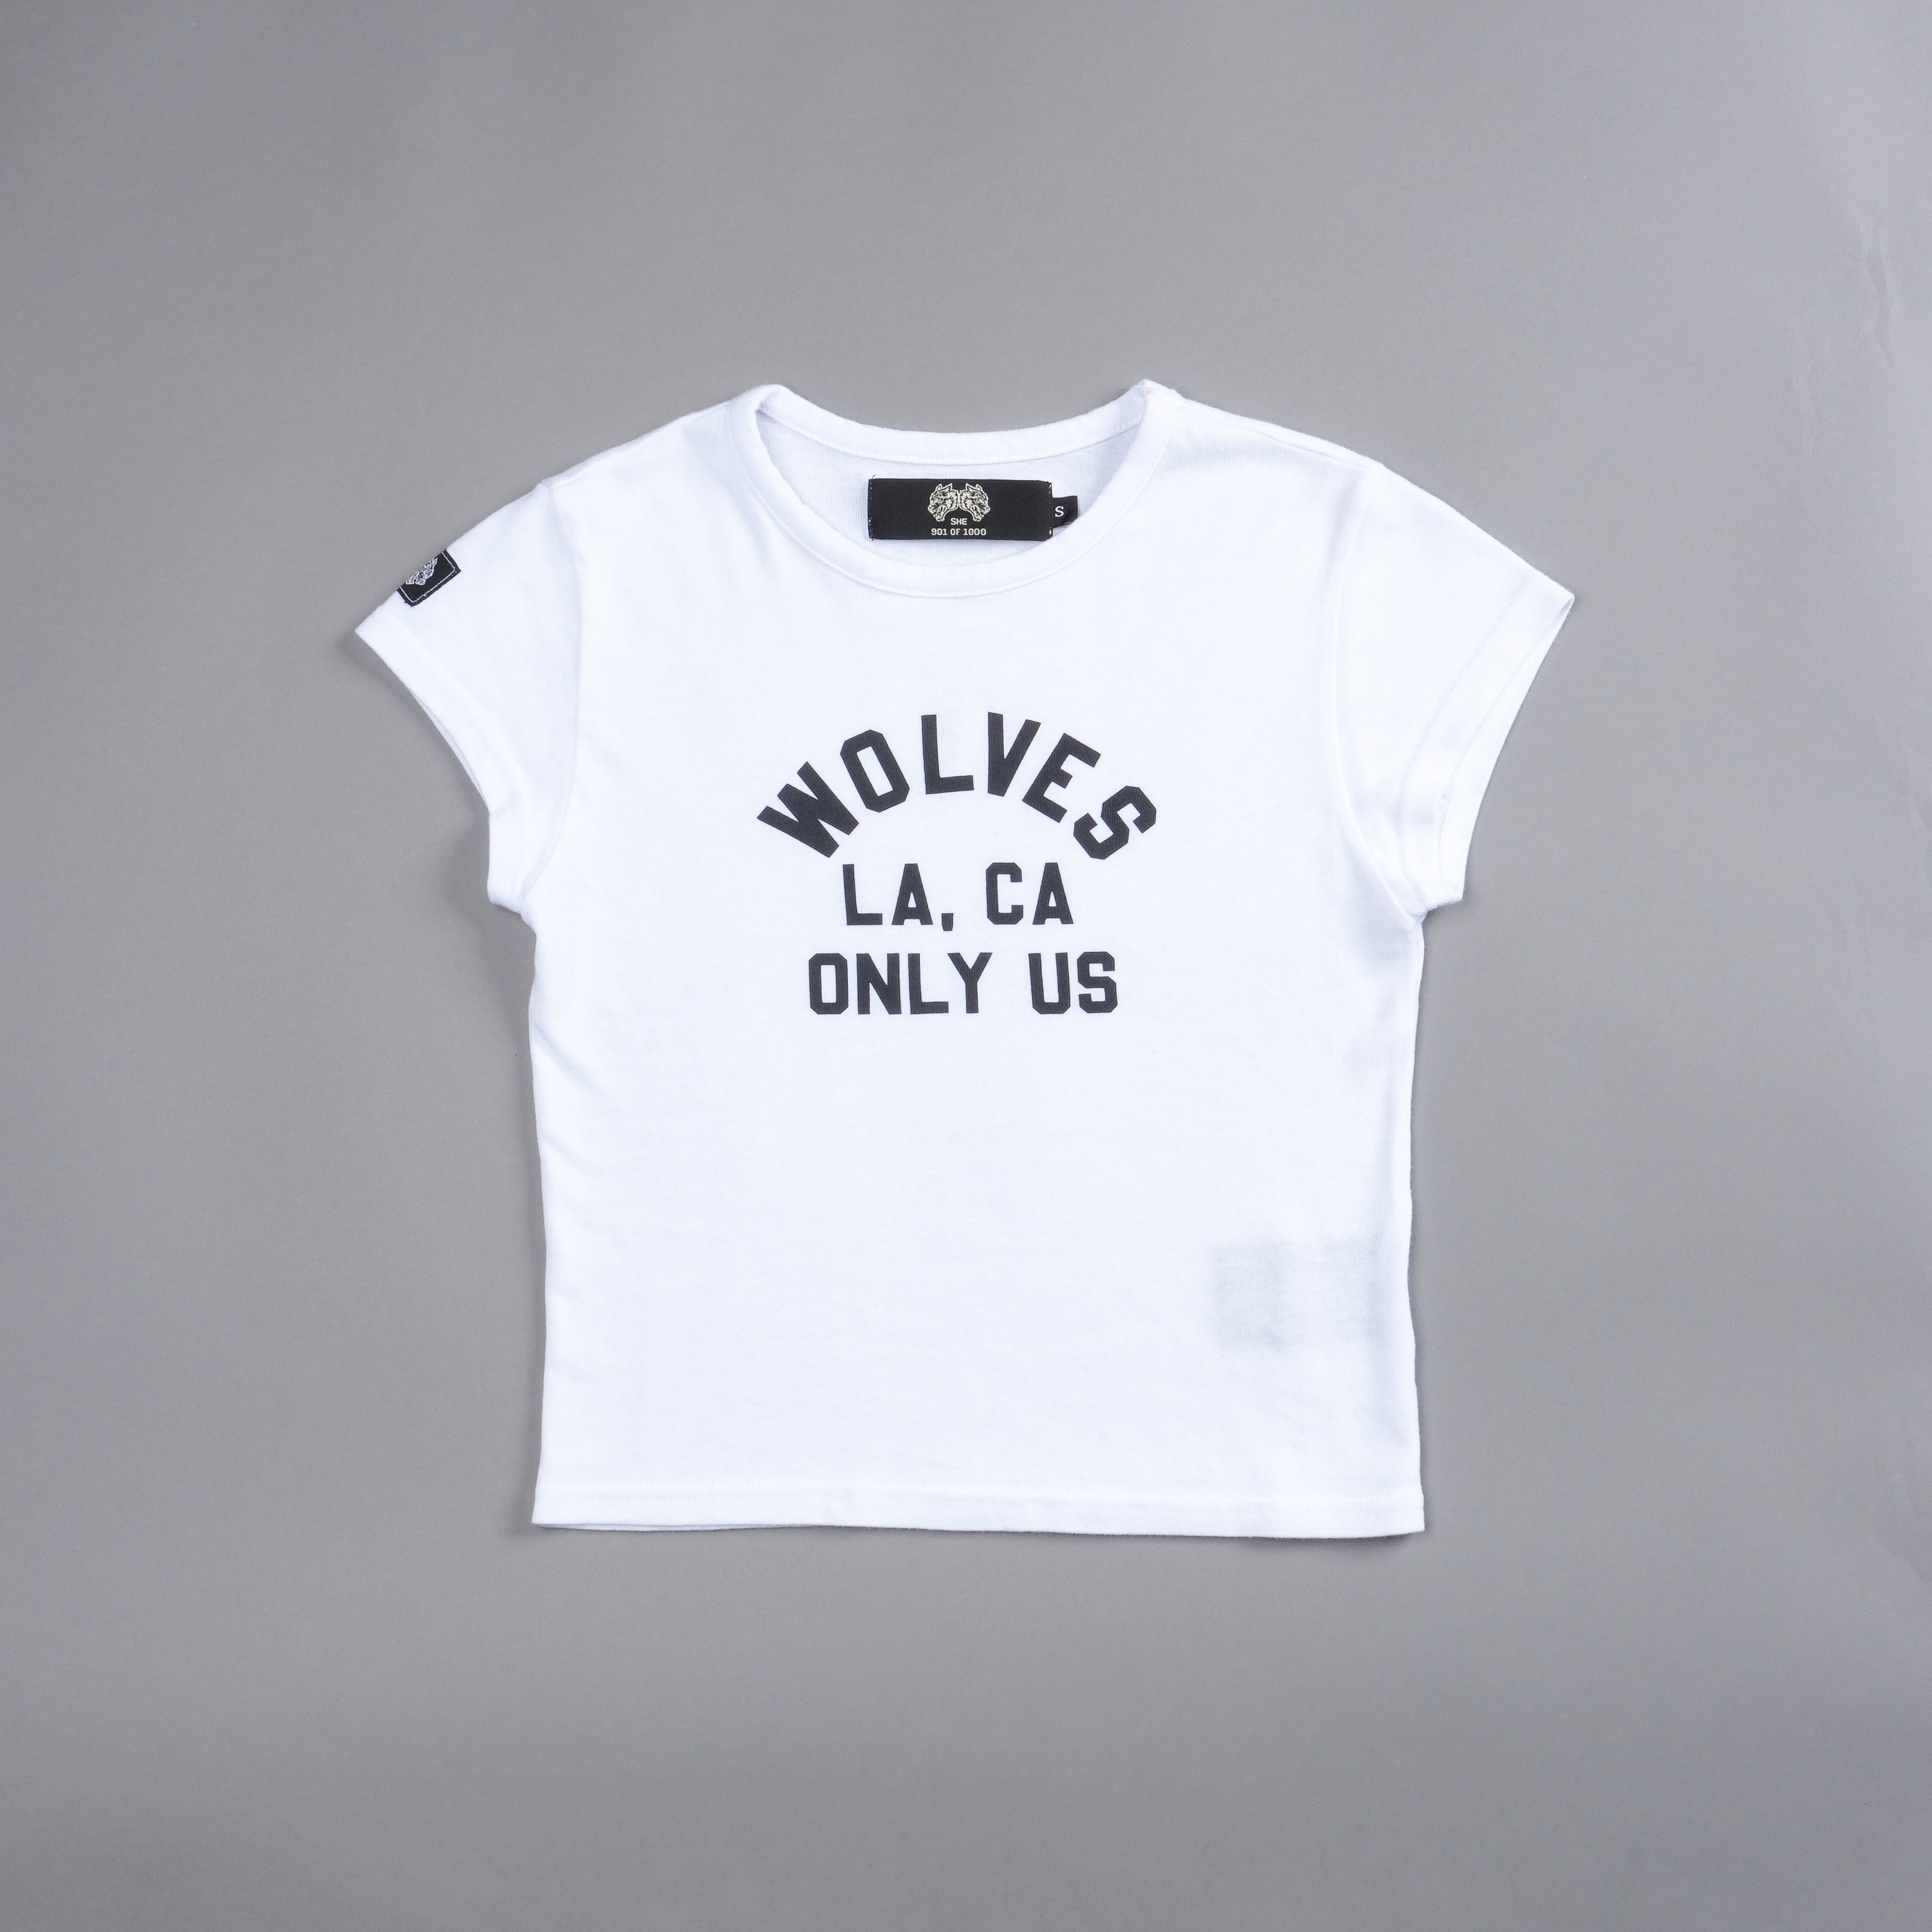 LA Wolves League Baby Tee in White